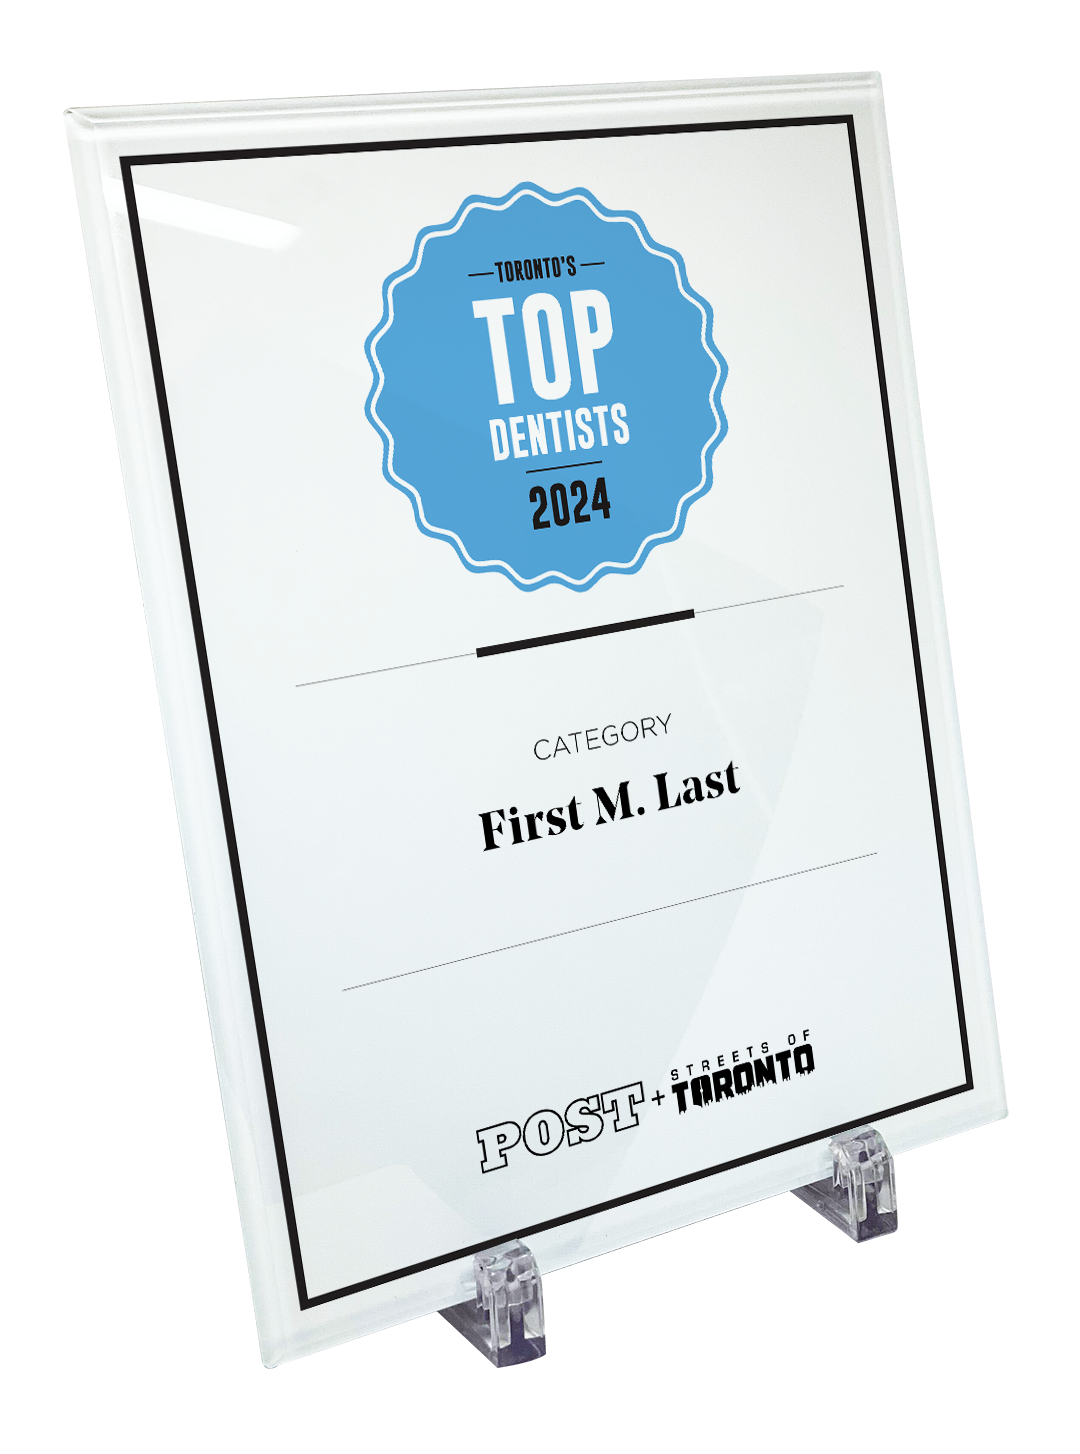 Post City Top Dentists - Crystal Glass Plaque